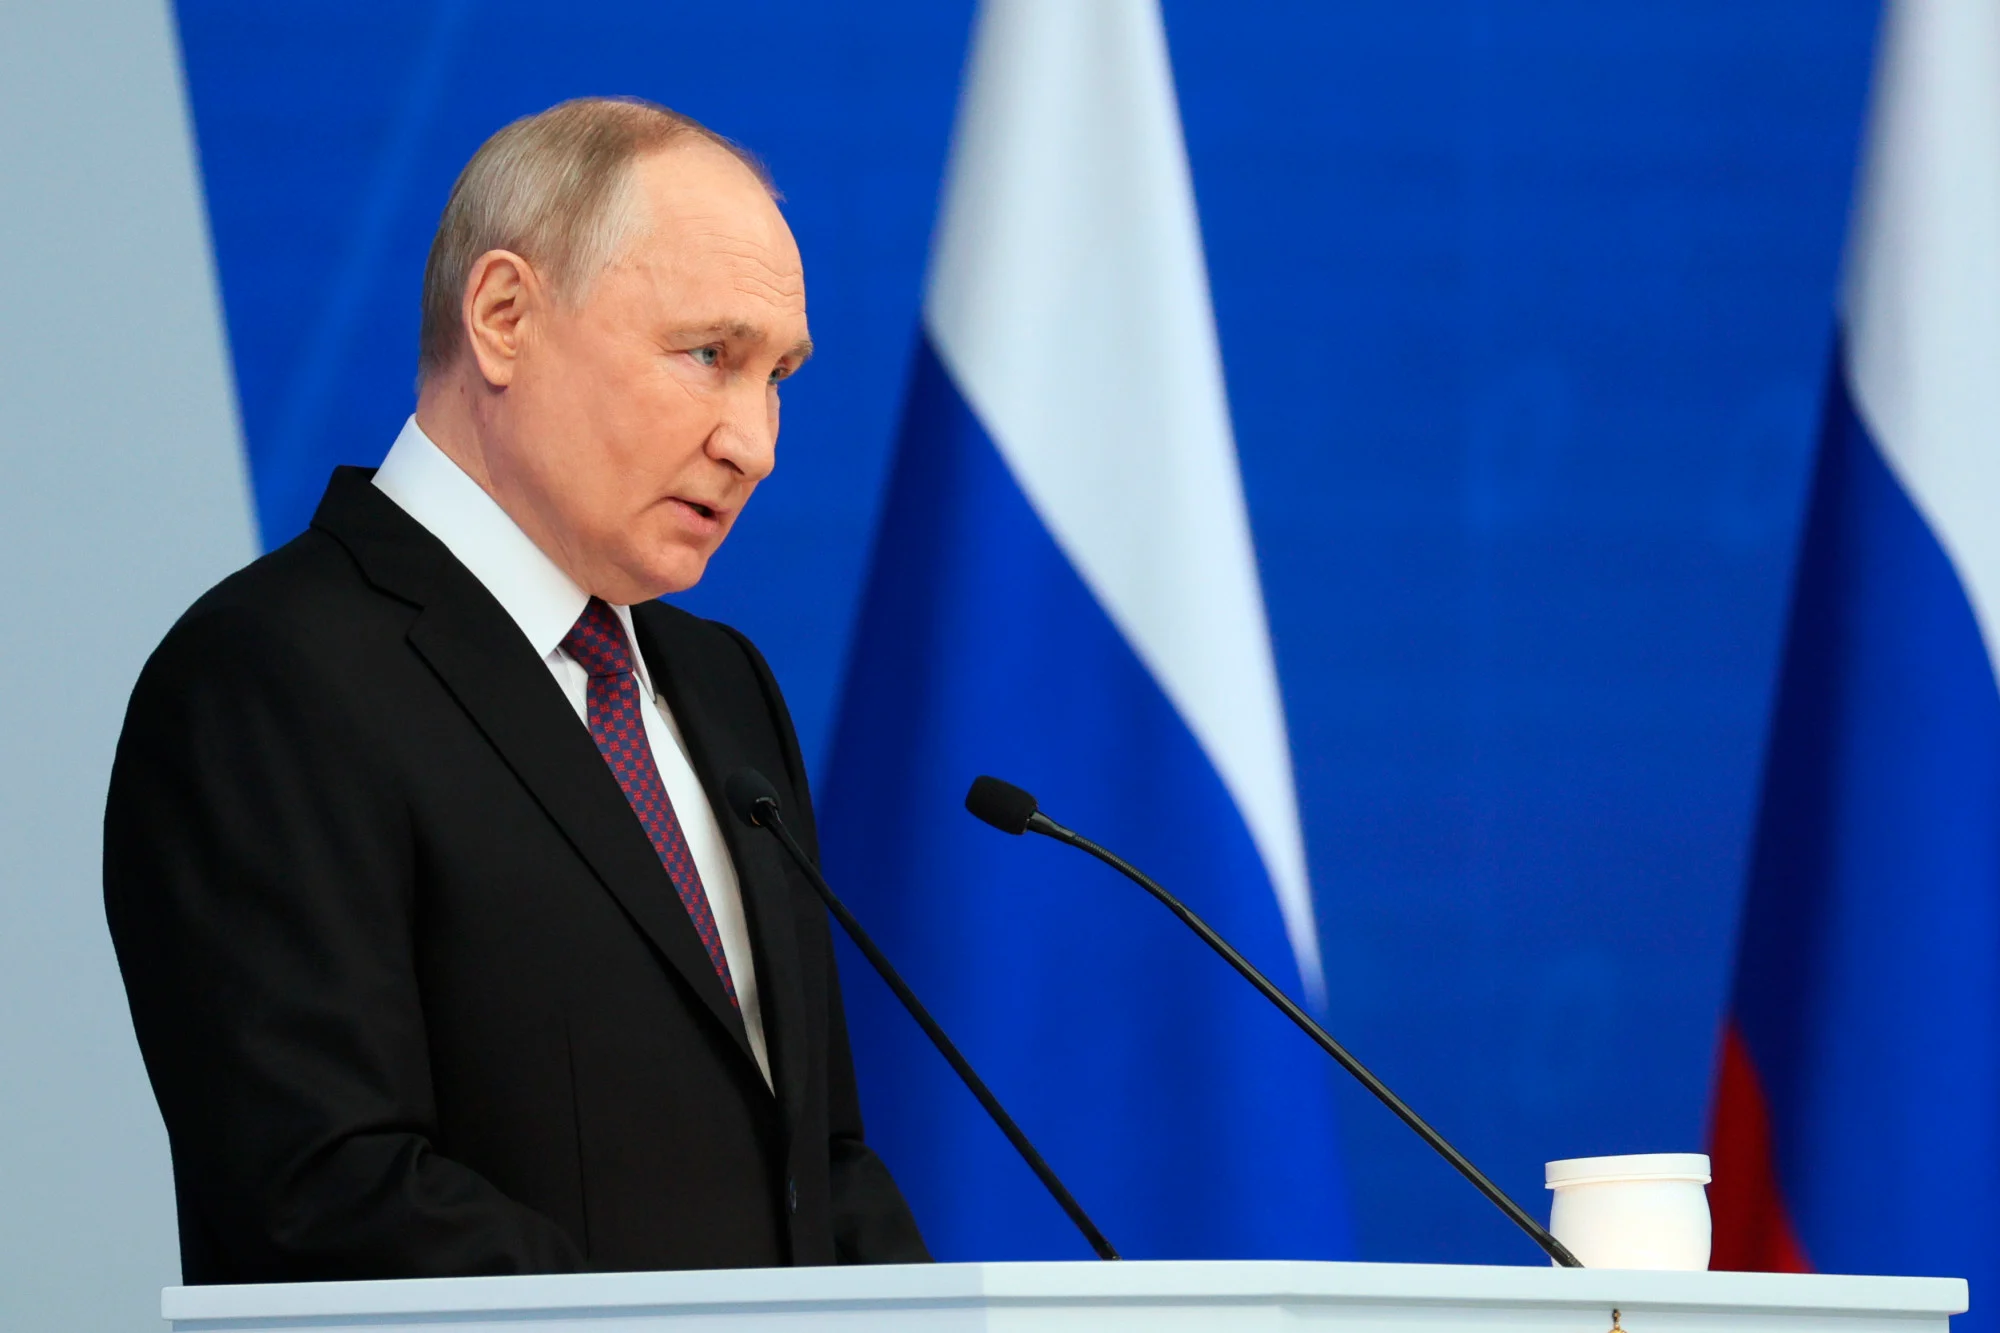 Putin warns Western nations of nuclear conflict over Ukraine involvement (Credits: South China Morning Post)